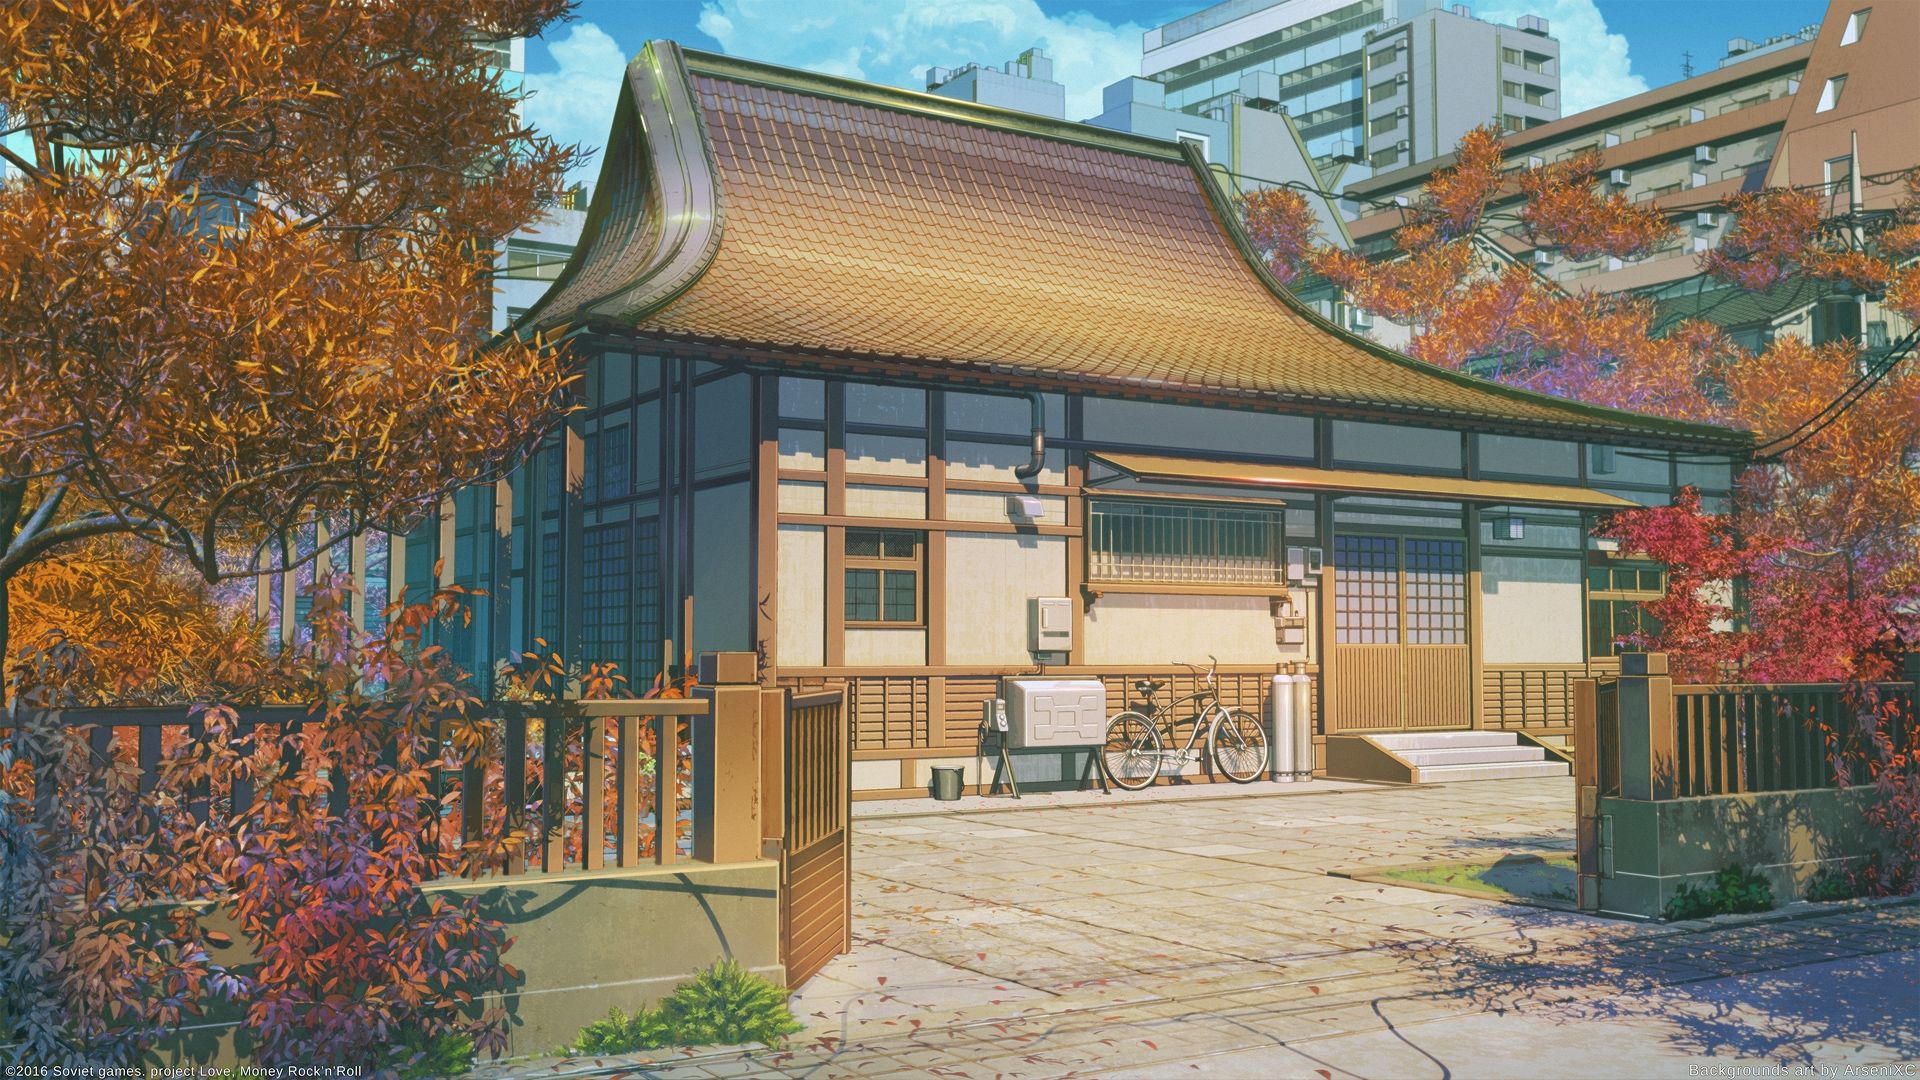 Download 1920x1080 Anime Landscape, Traditional Building, Scenic, Bicycle, Fence, Trees, House Wallpaper for Widescreen